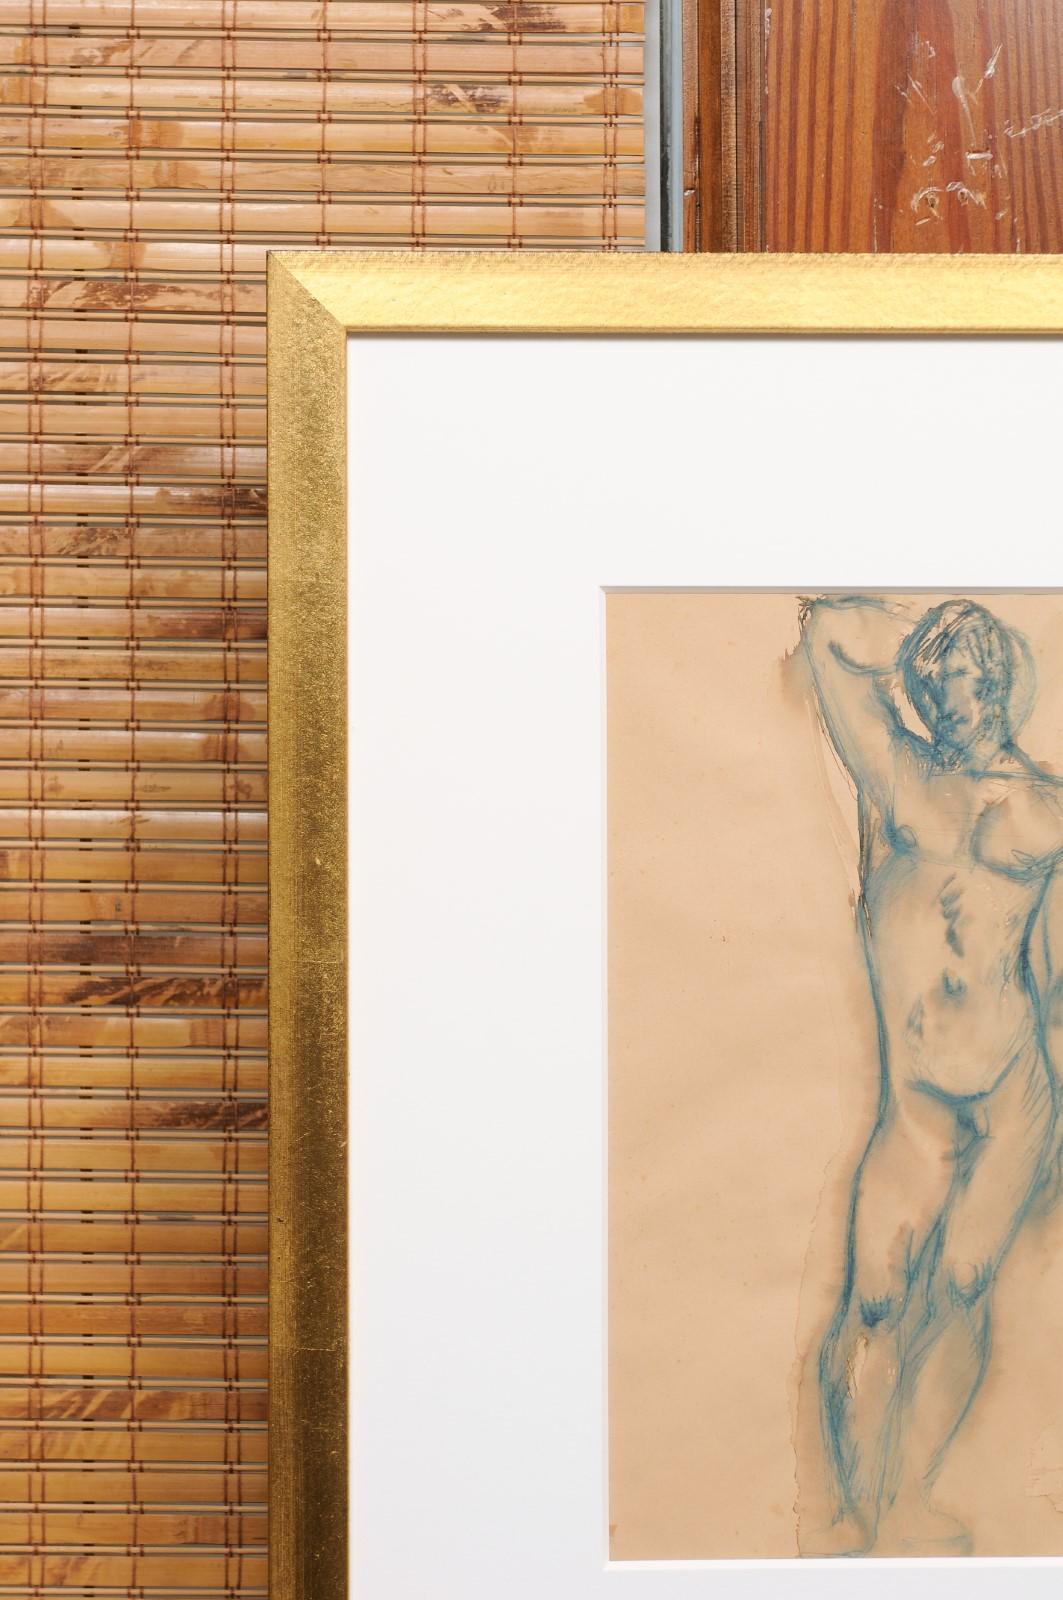 Paper Fritz Wotruba, Untitled 'Nude' For Sale